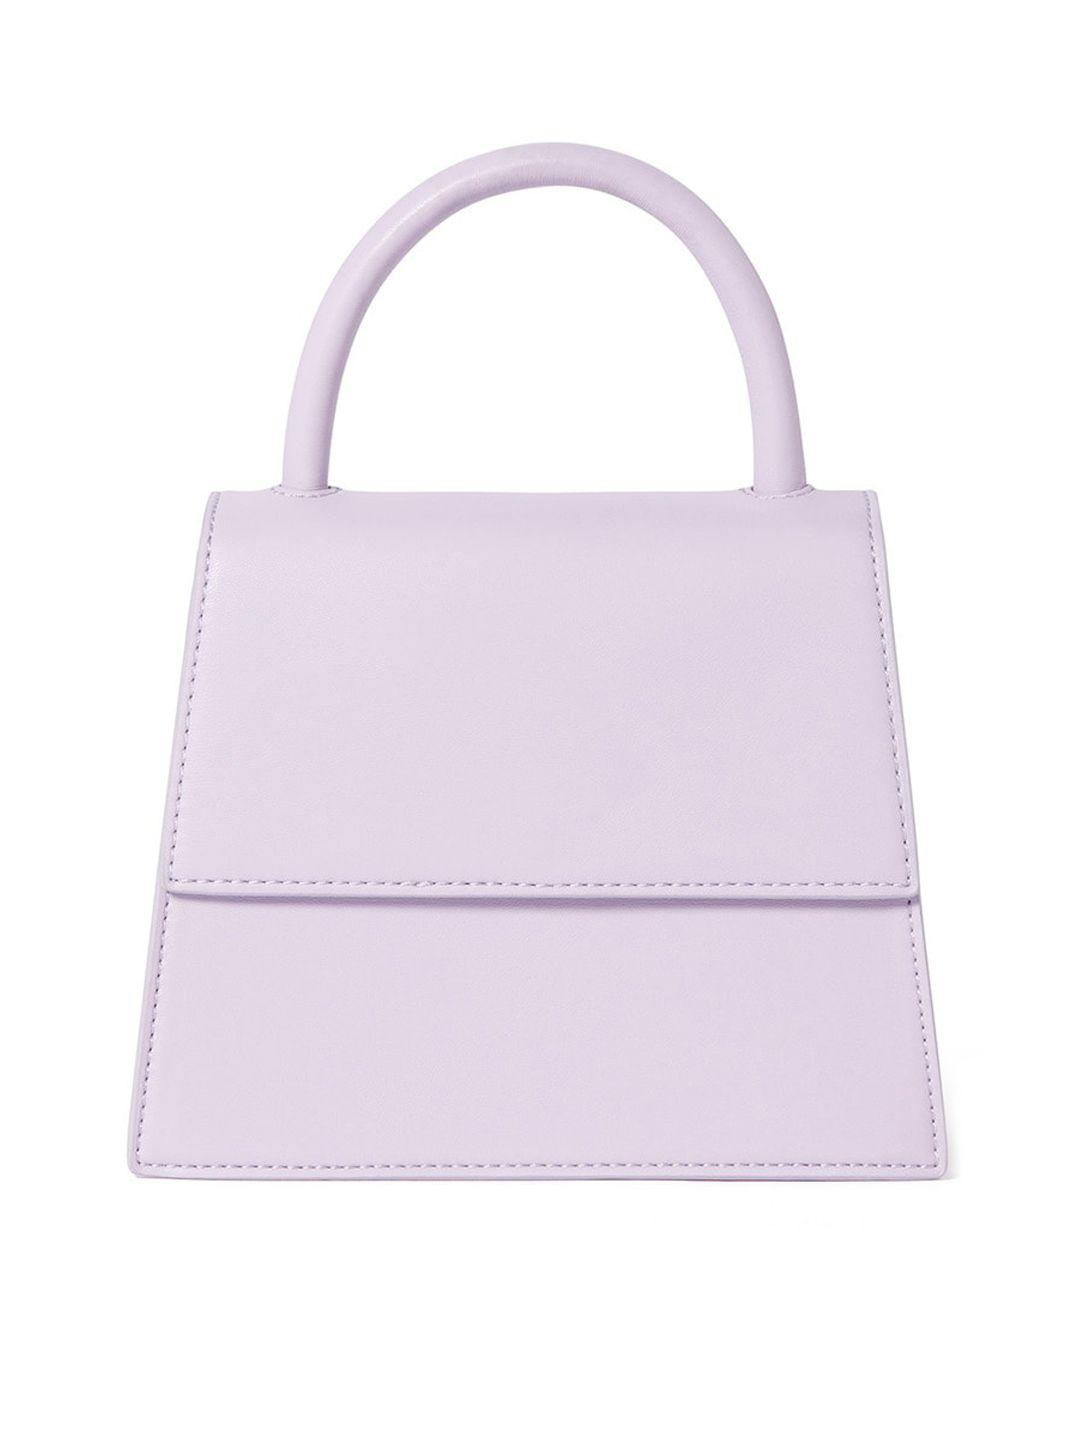 forever new purple pu structured handheld bag